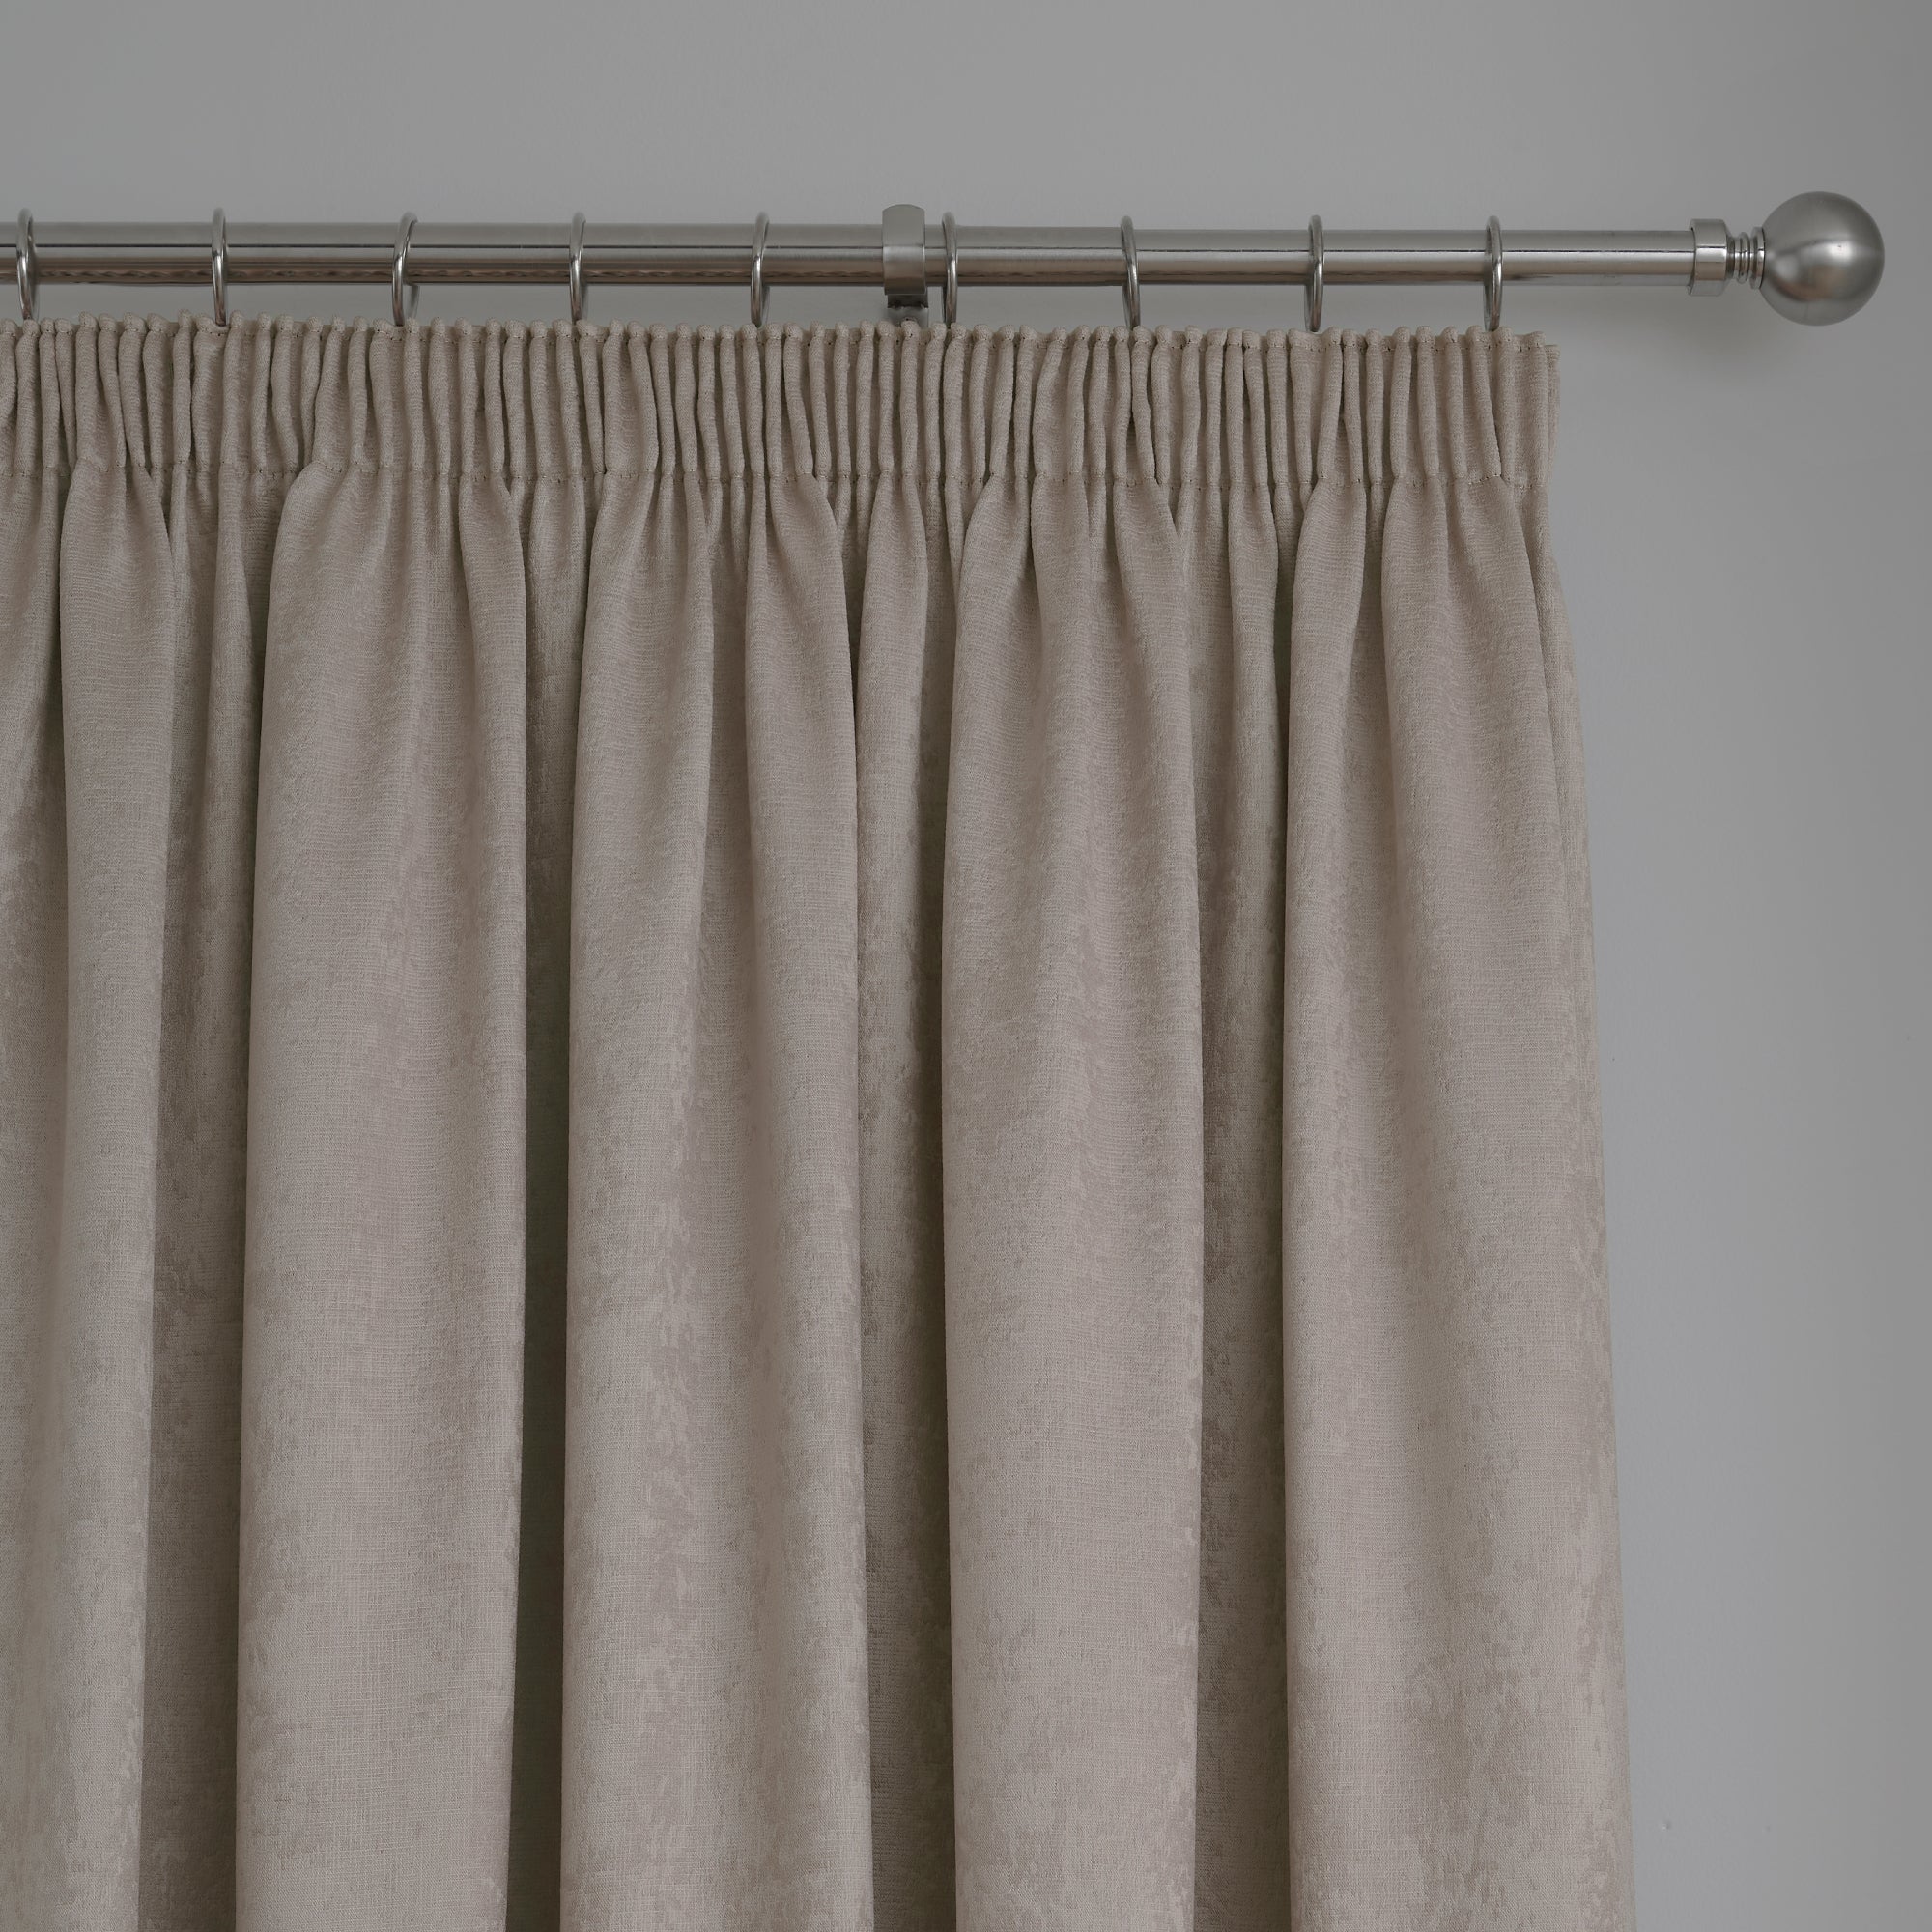 Pair of Pencil Pleat Curtains Galaxy by Fusion in Natural